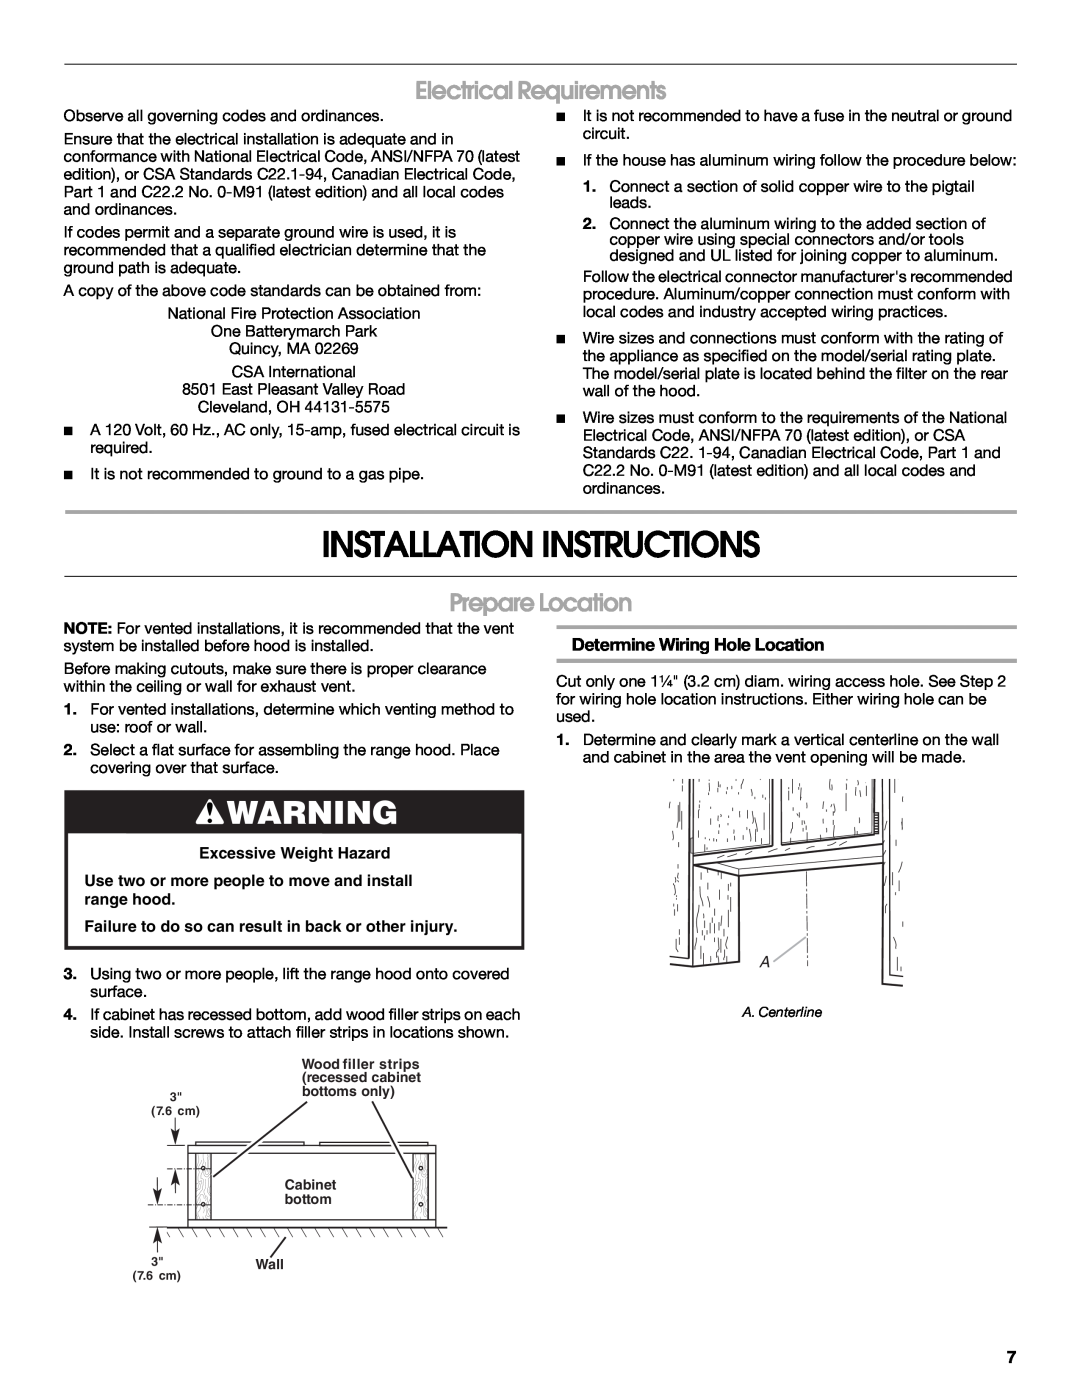 Whirlpool 24" (58 CM) Installation Instructions, Electrical Requirements, Prepare Location, Determine Wiring Hole Location 